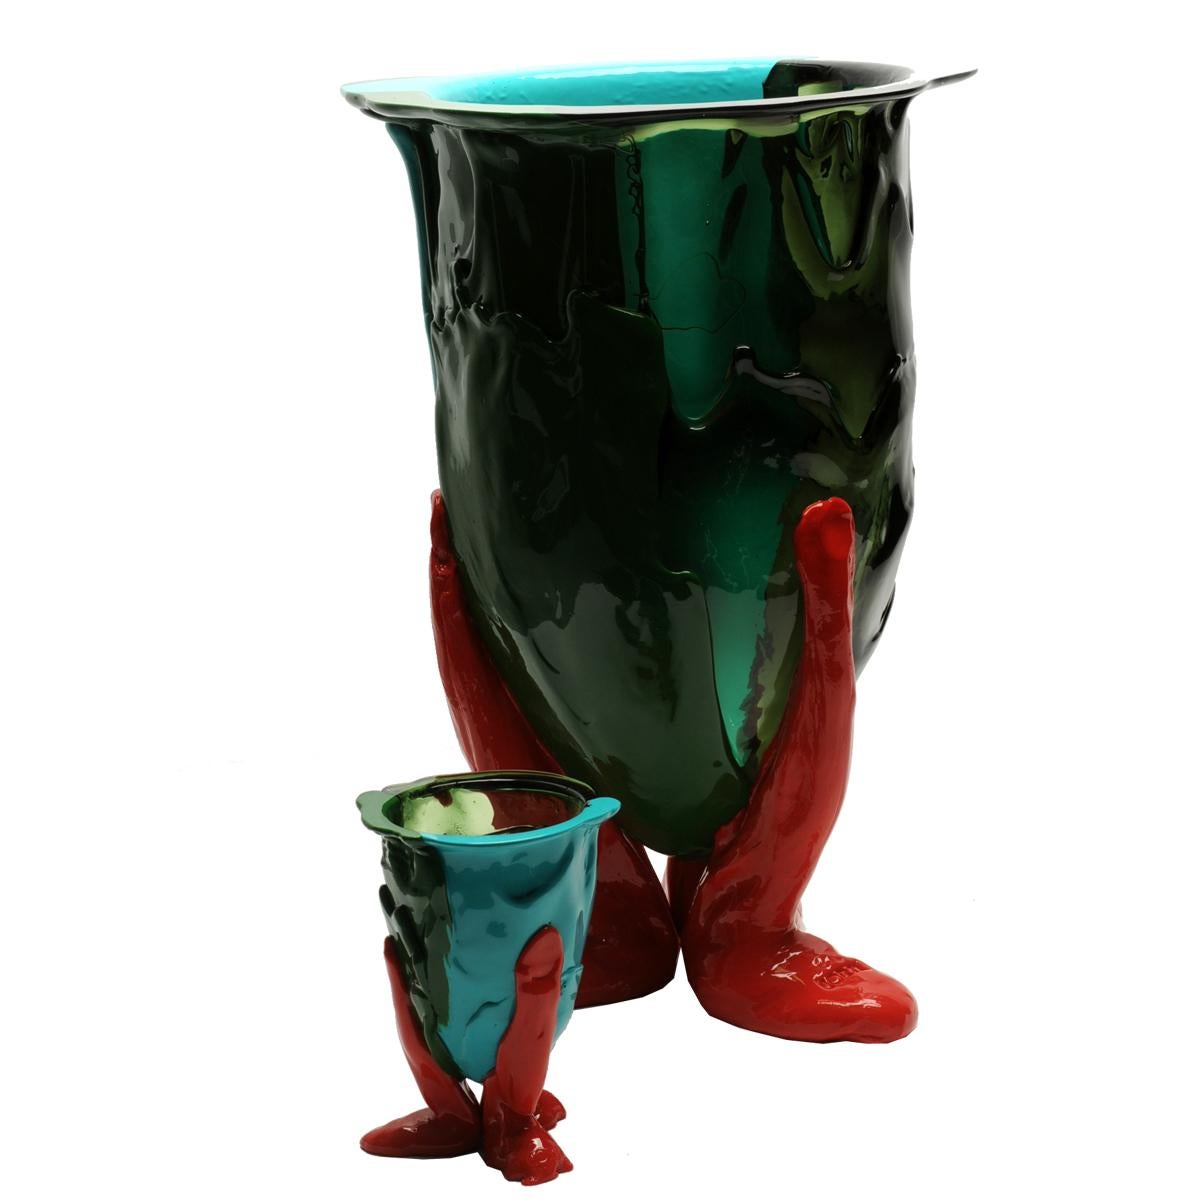 Contemporary Gaetano Pesce Amazonia XL Vase Resin Green Turquoise Coral Red In New Condition For Sale In barasso, IT